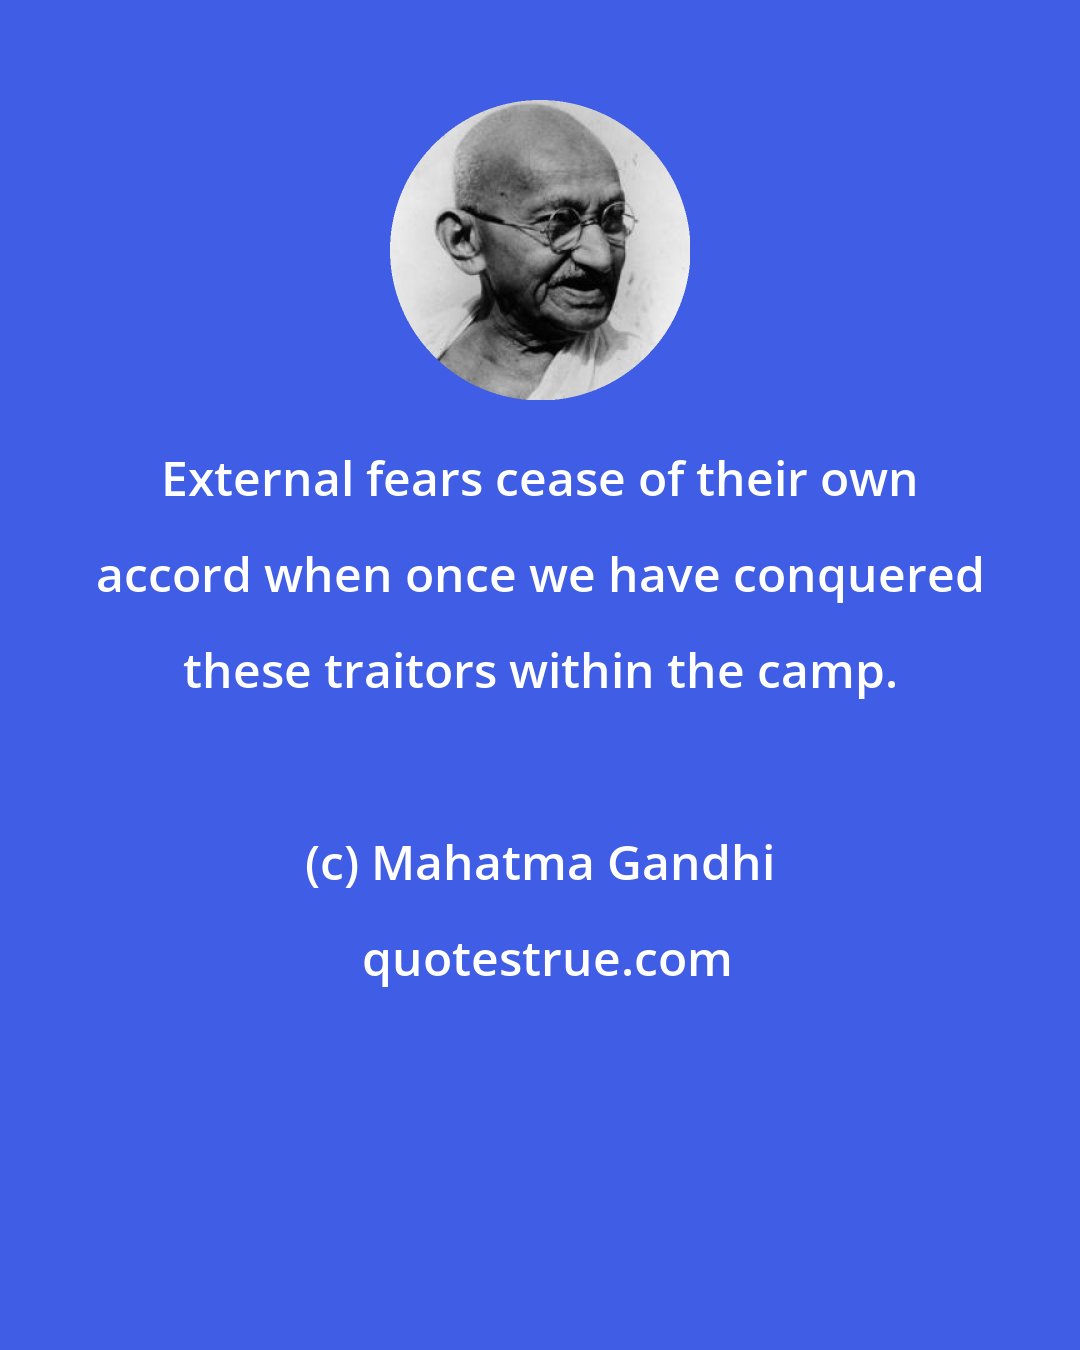 Mahatma Gandhi: External fears cease of their own accord when once we have conquered these traitors within the camp.